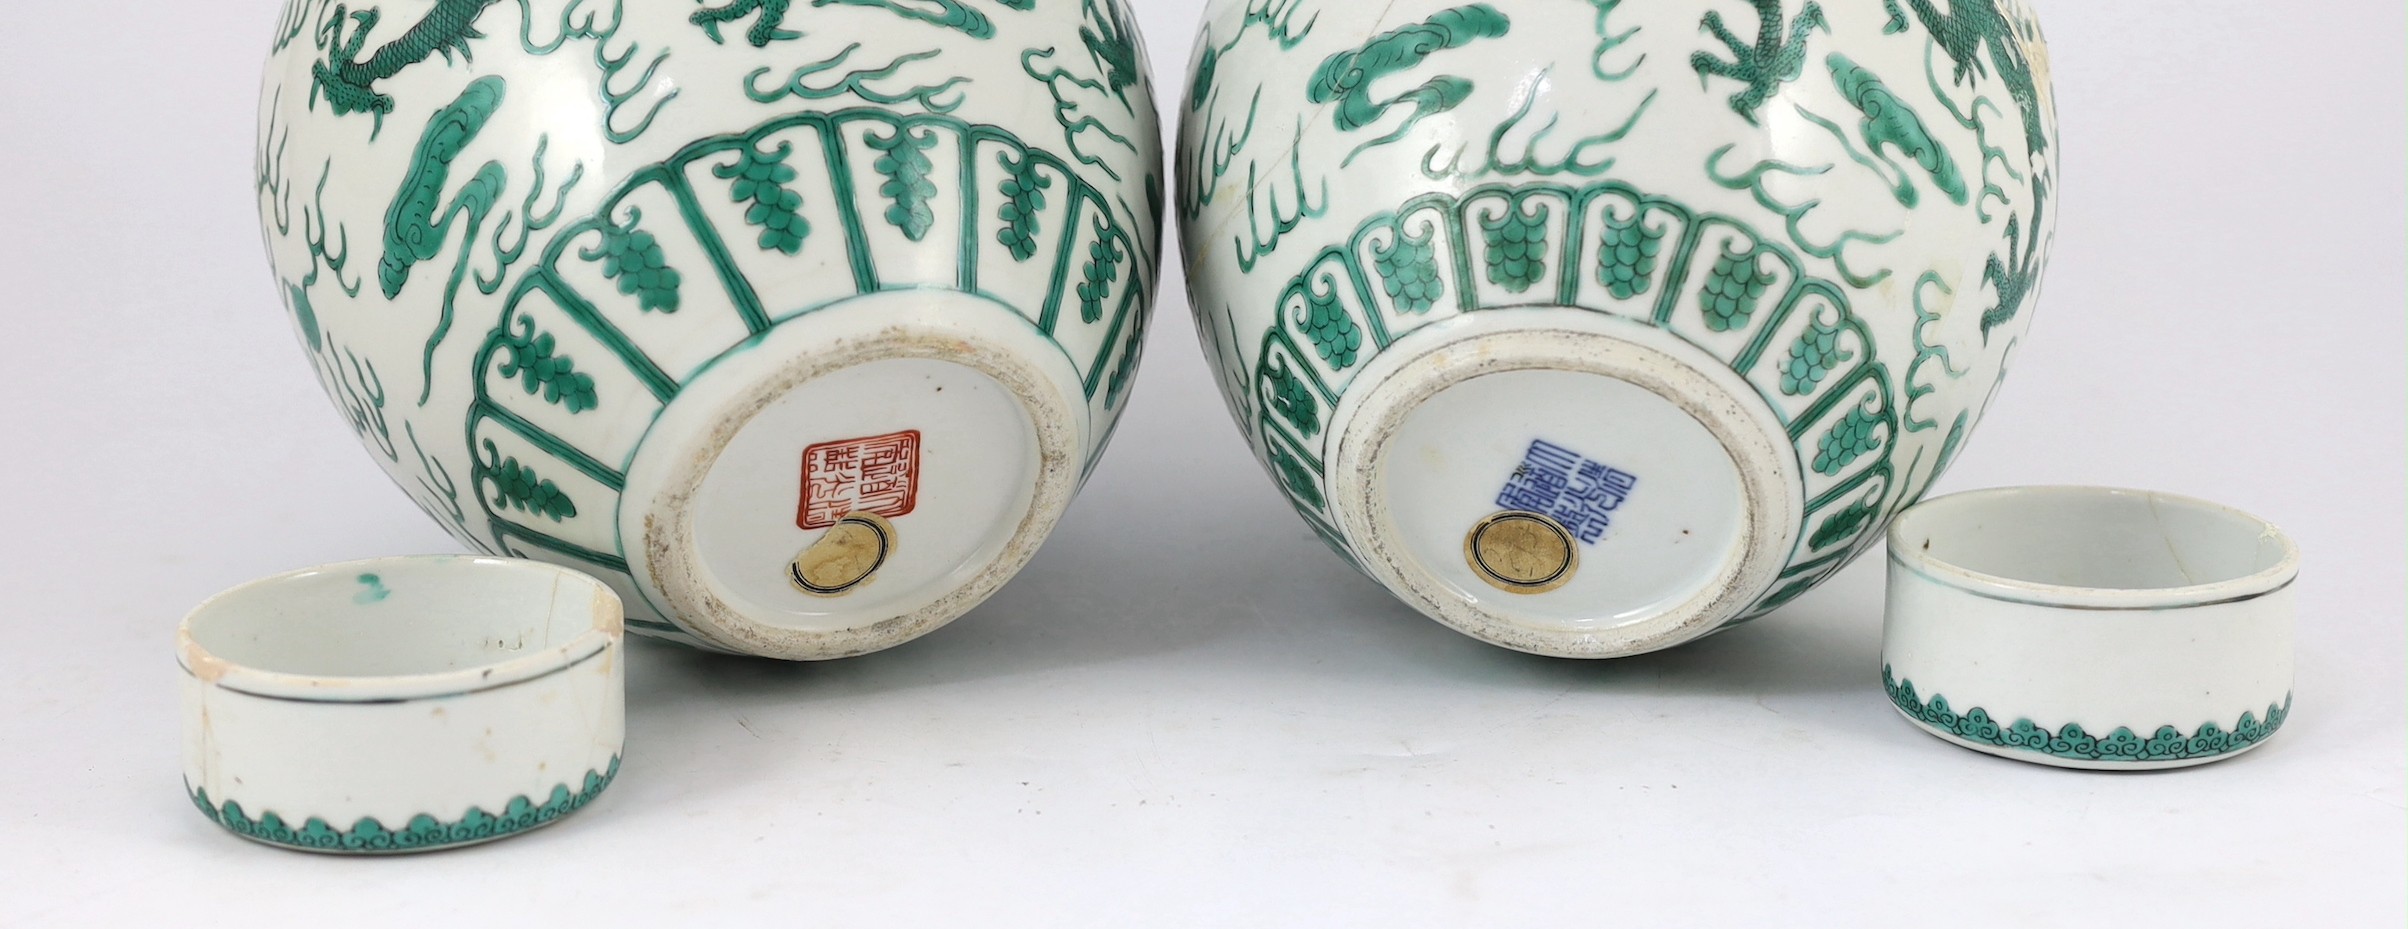 Two similar Chinese green enamelled ‘dragon’ jars and covers, Daoguang mark and period (1821-50), 21.5cm high, damaged and repaired